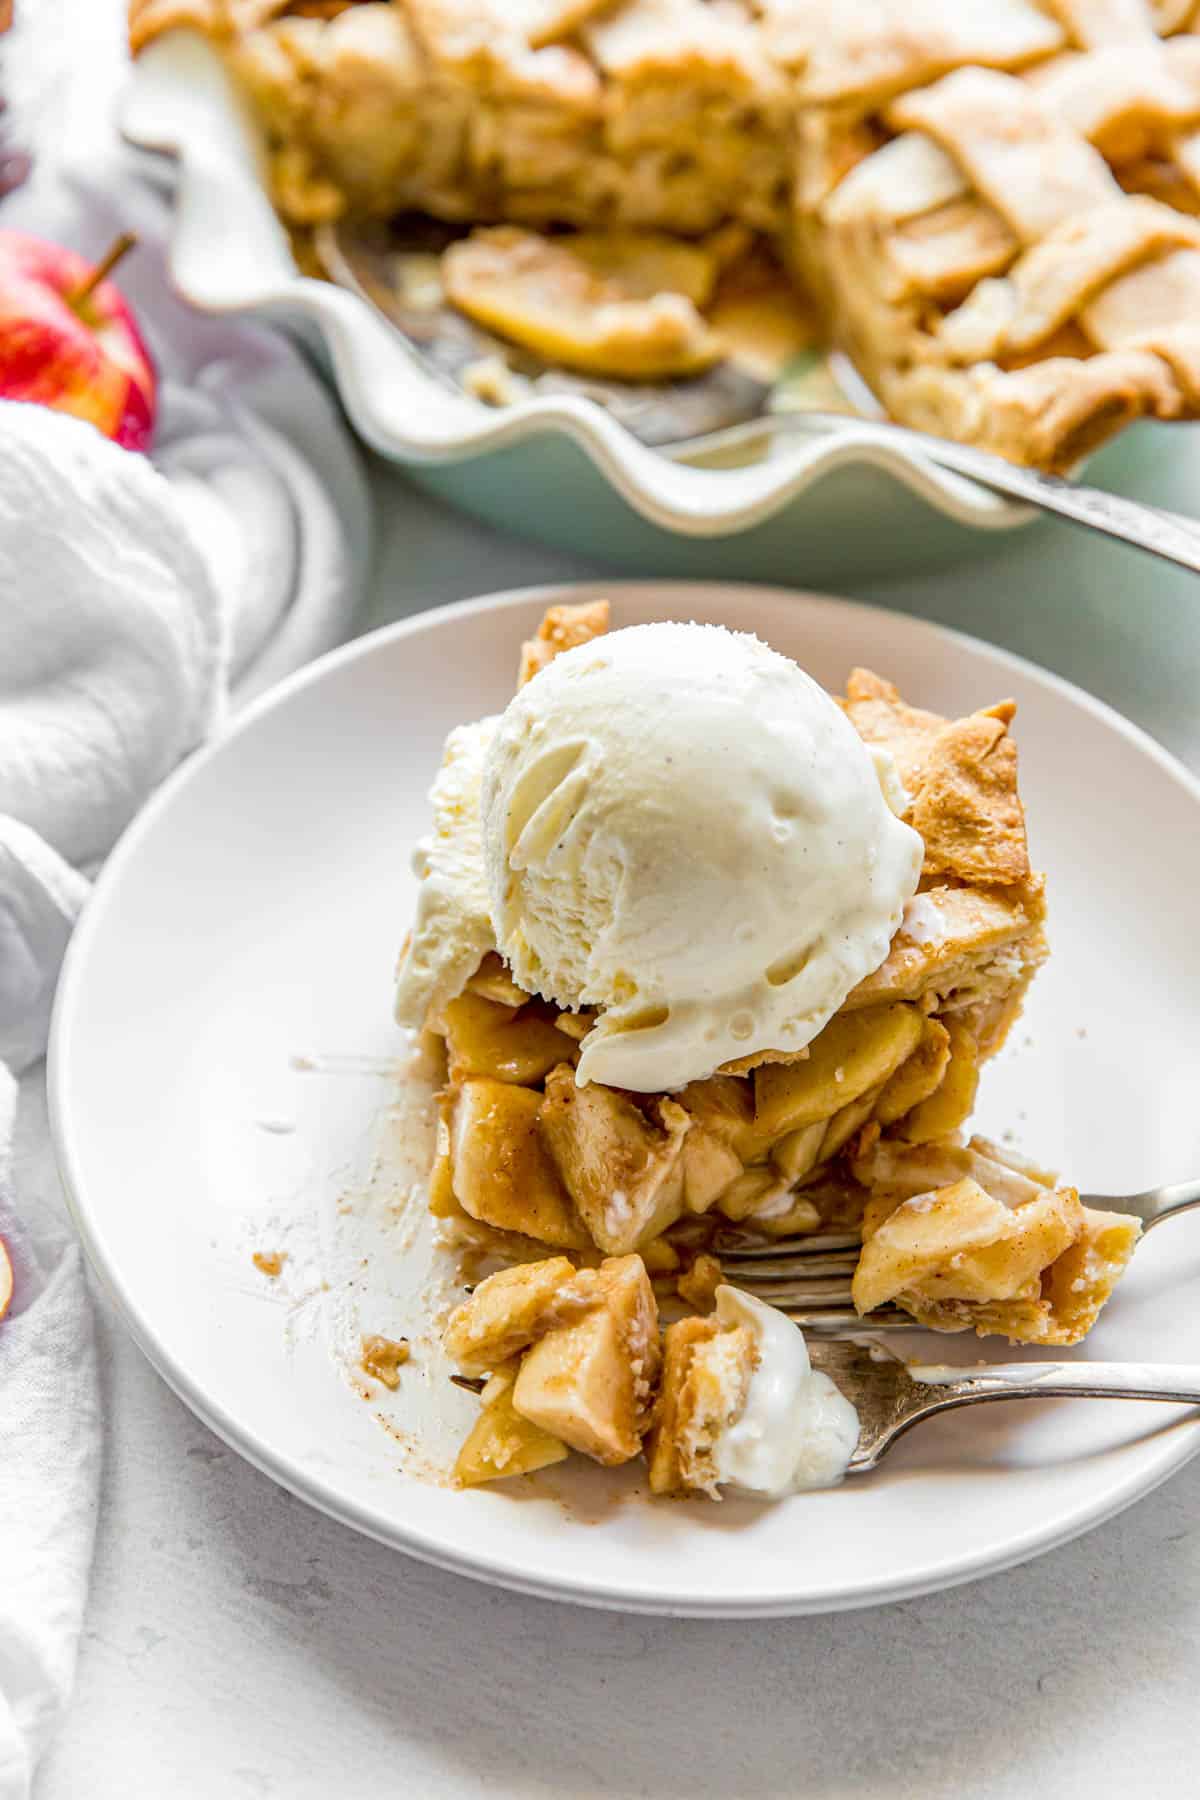 a slice of apple pie on a white plate with a scoop of vanilla ice cream on top